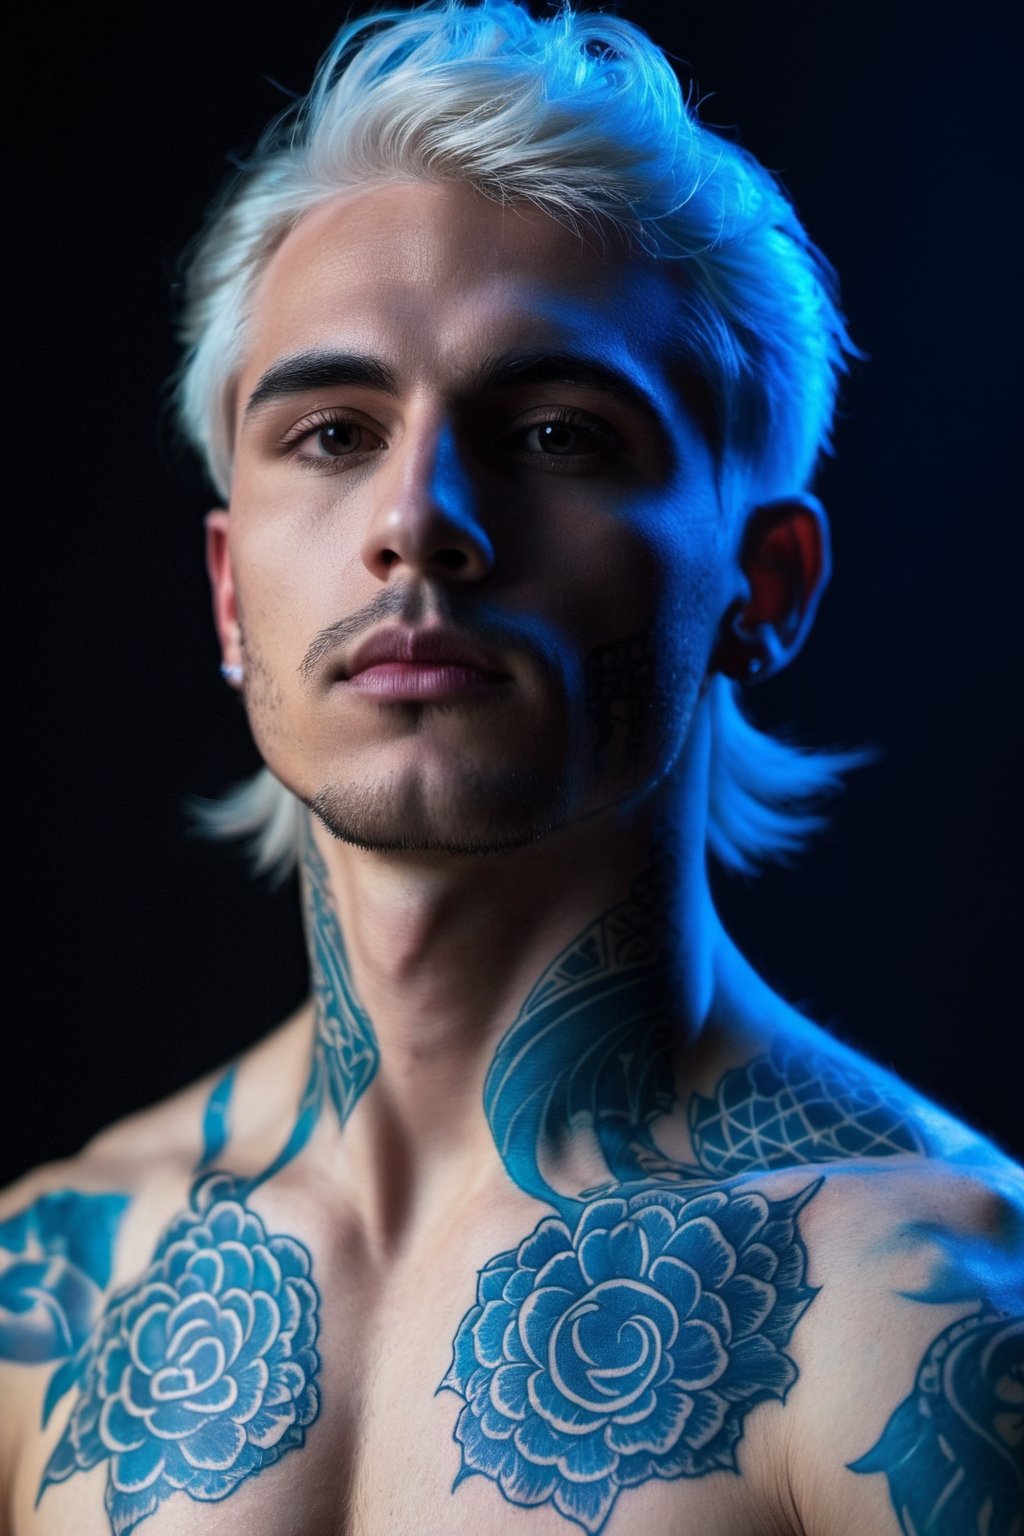 (extreamly delicate and beautiful:1.2), 8K, (tmasterpiece, best:1.2), (MALE:1.5) masterpiece, best quality, (detailed:1.3) halfnaked body with pale skin and (long_white_hair:1.4). All of his pale skin there are (blue_glowing_tattoes:1.5), on face, on body. (MAGICAL_BIOLUMINESCENT_TATTOOES:1.5) Naked upper body, paleblue colour dominating, cloudy night, sharp focus, highly detailed, Magical Fantasy style,GlowingRunesAI_blue,,bioluminescent fbpz body paint,Eren_jaeger_face,4rmorbre4k,GlowingRunesAI_blue